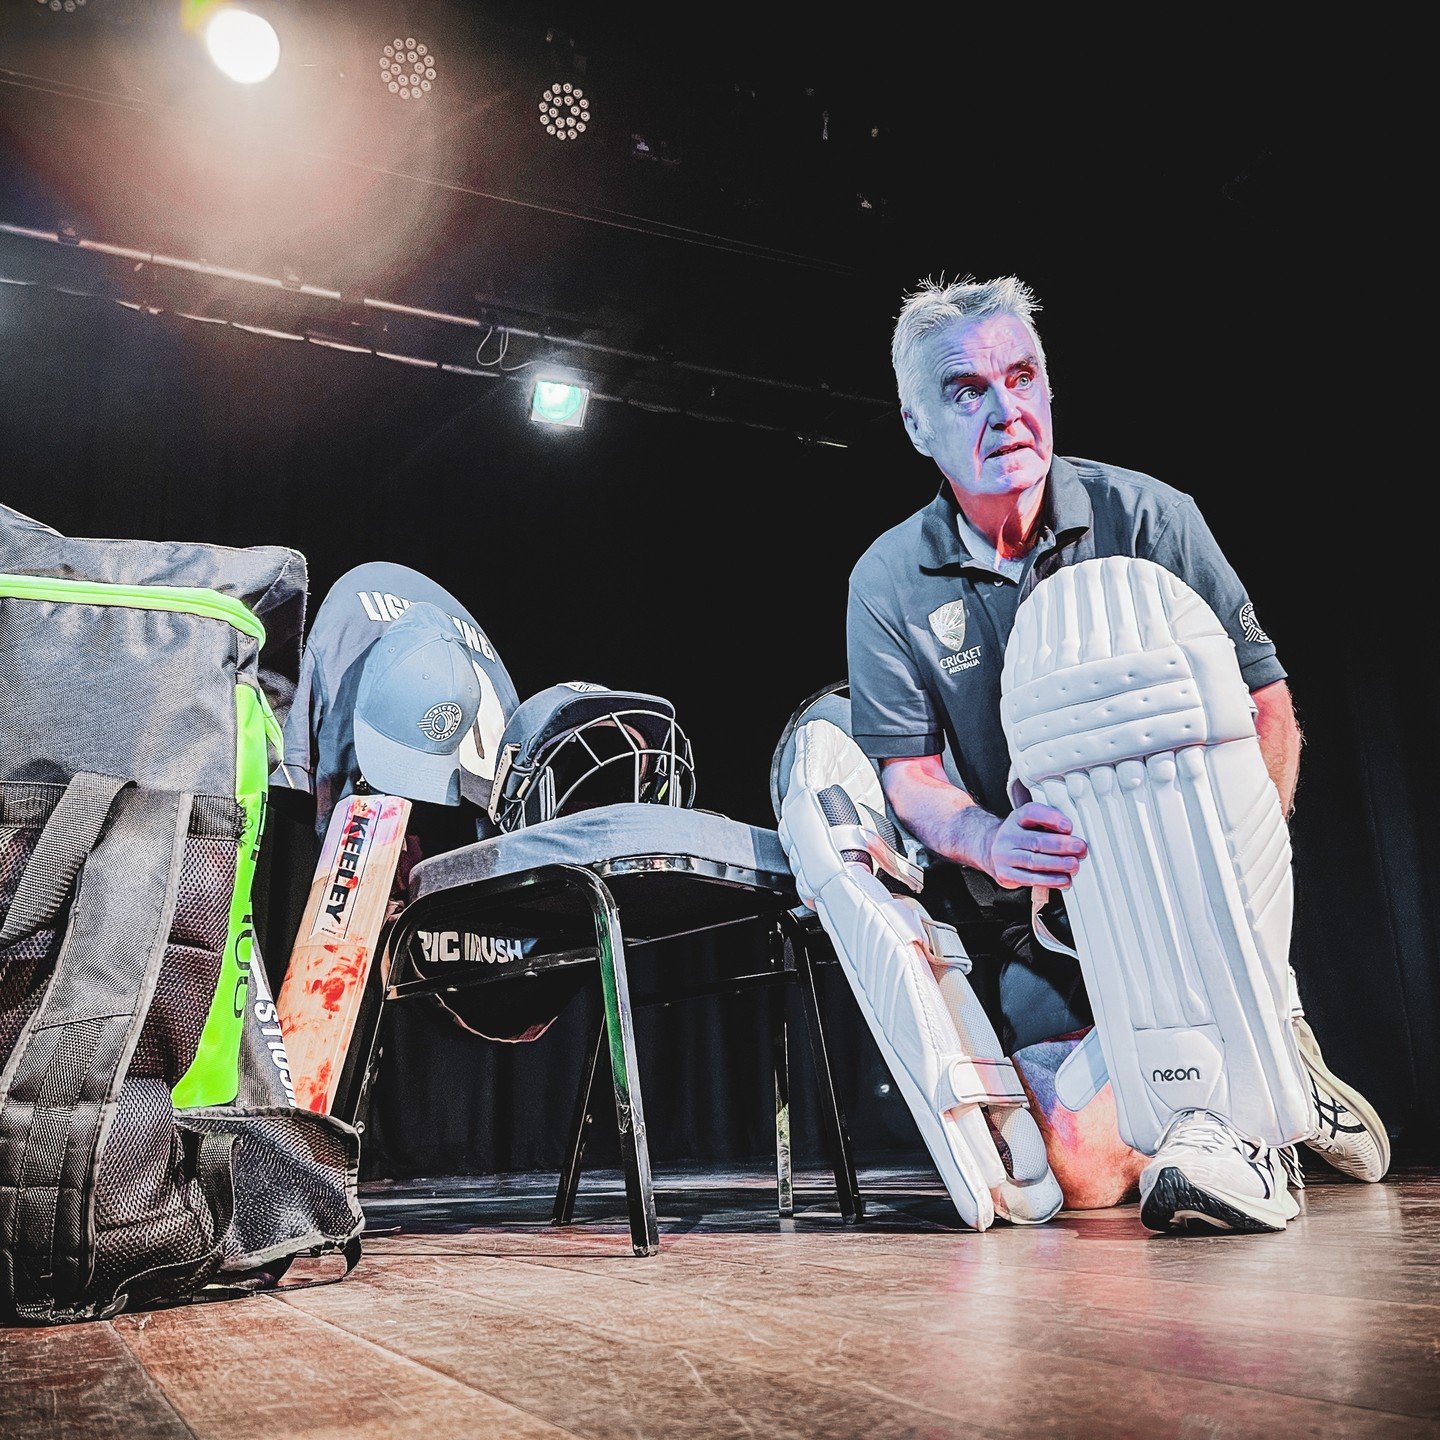 After last week's appearance in Appraisal and last year's sell out show with Watson The Final Problem, Tim Marriott is back on Thursday 16th May, 7.30pm with the very funny and thought provoking Jack's Ashes.

&quot;163 to win in twenty overs, we've 